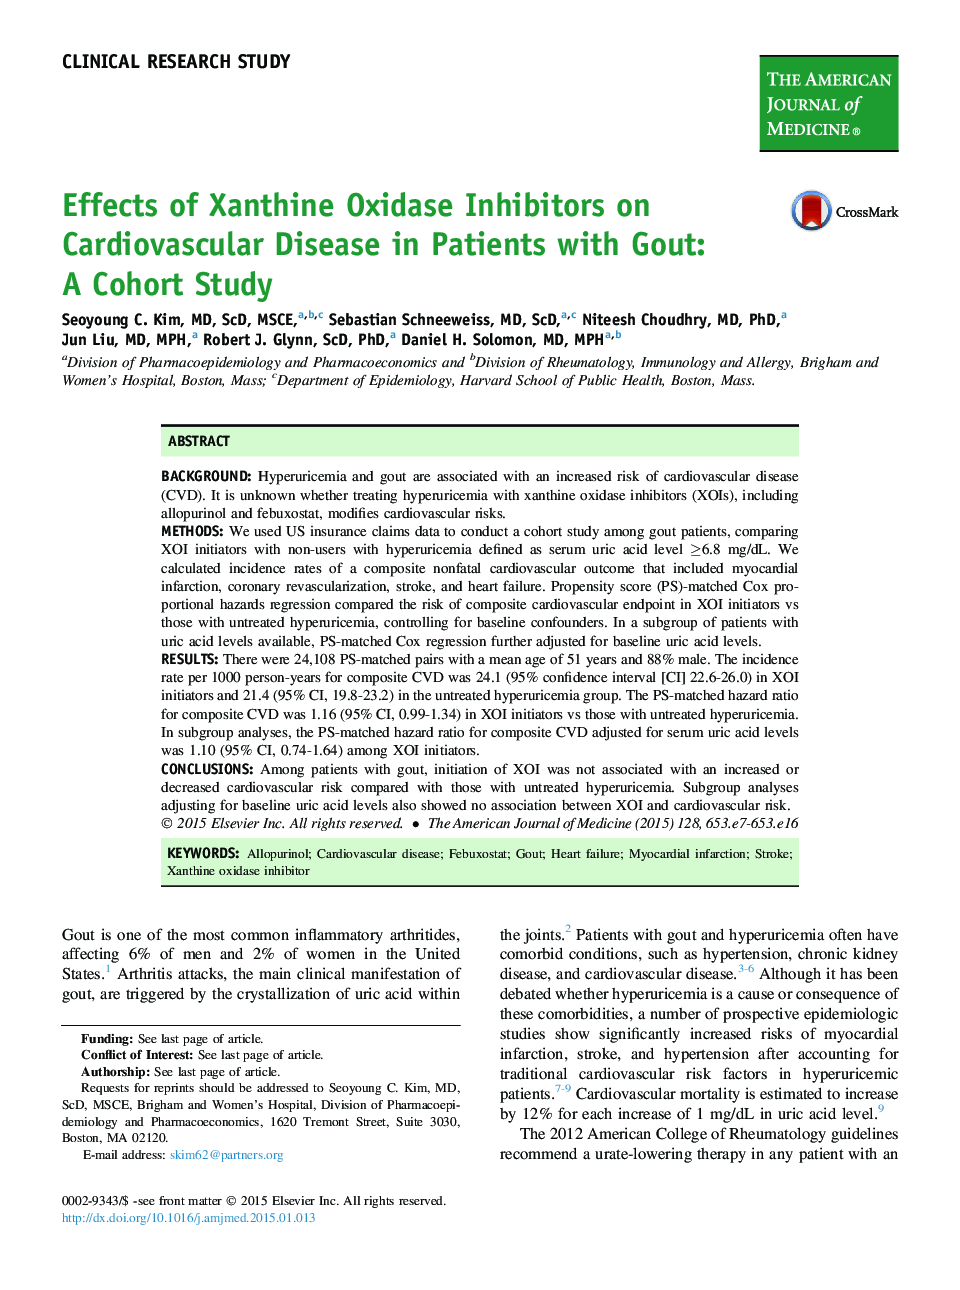 Effects of Xanthine Oxidase Inhibitors on Cardiovascular Disease in Patients with Gout: AÂ Cohort Study